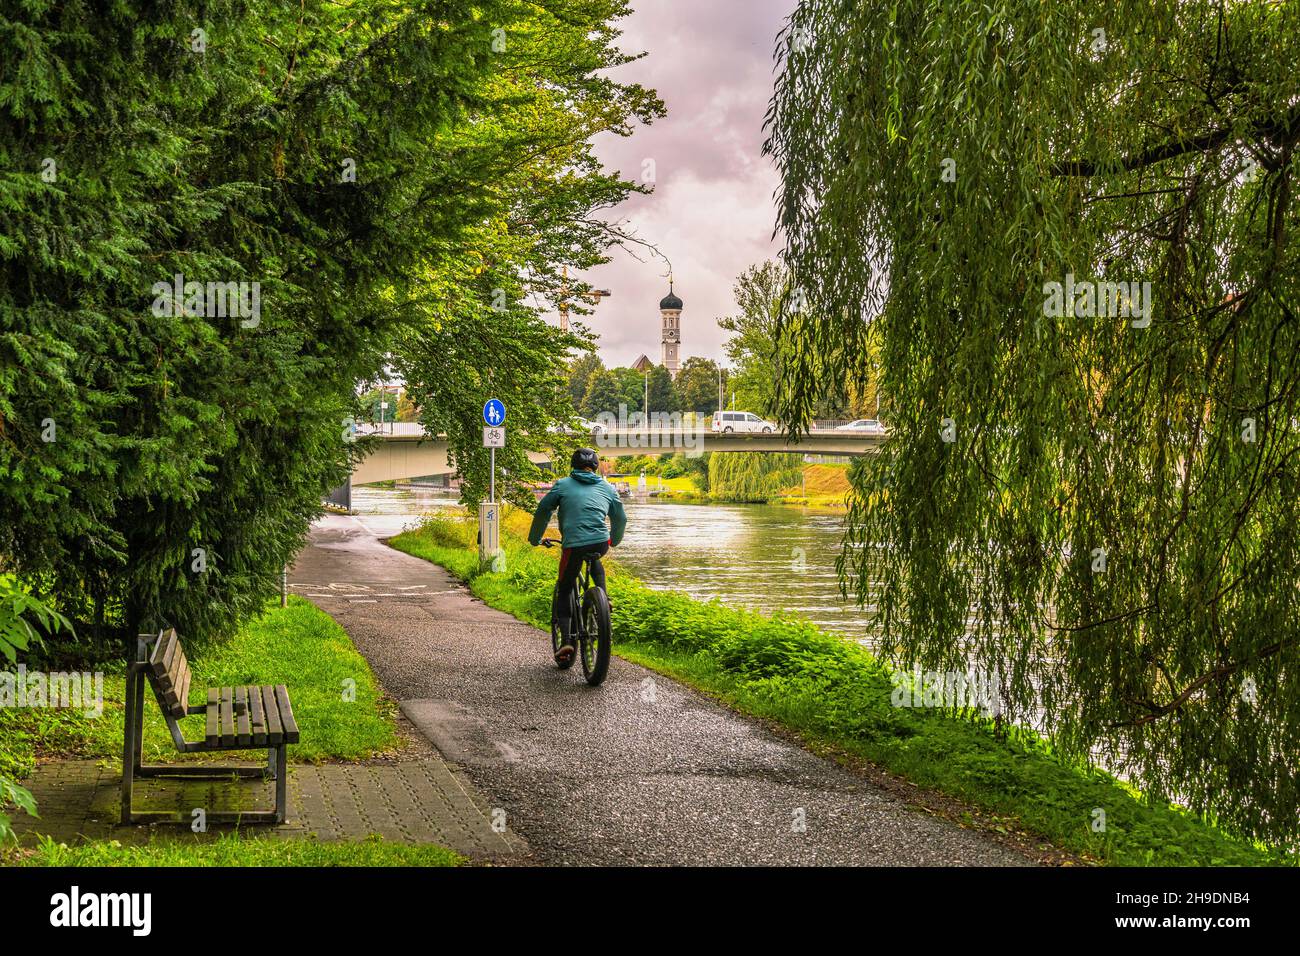 Pedestrian and cycle path along the Danube through the medieval city of Ulm. Sportsmen cycling and jogging. Ulm, Tubingen, Donau-Iller region, Germany Stock Photo